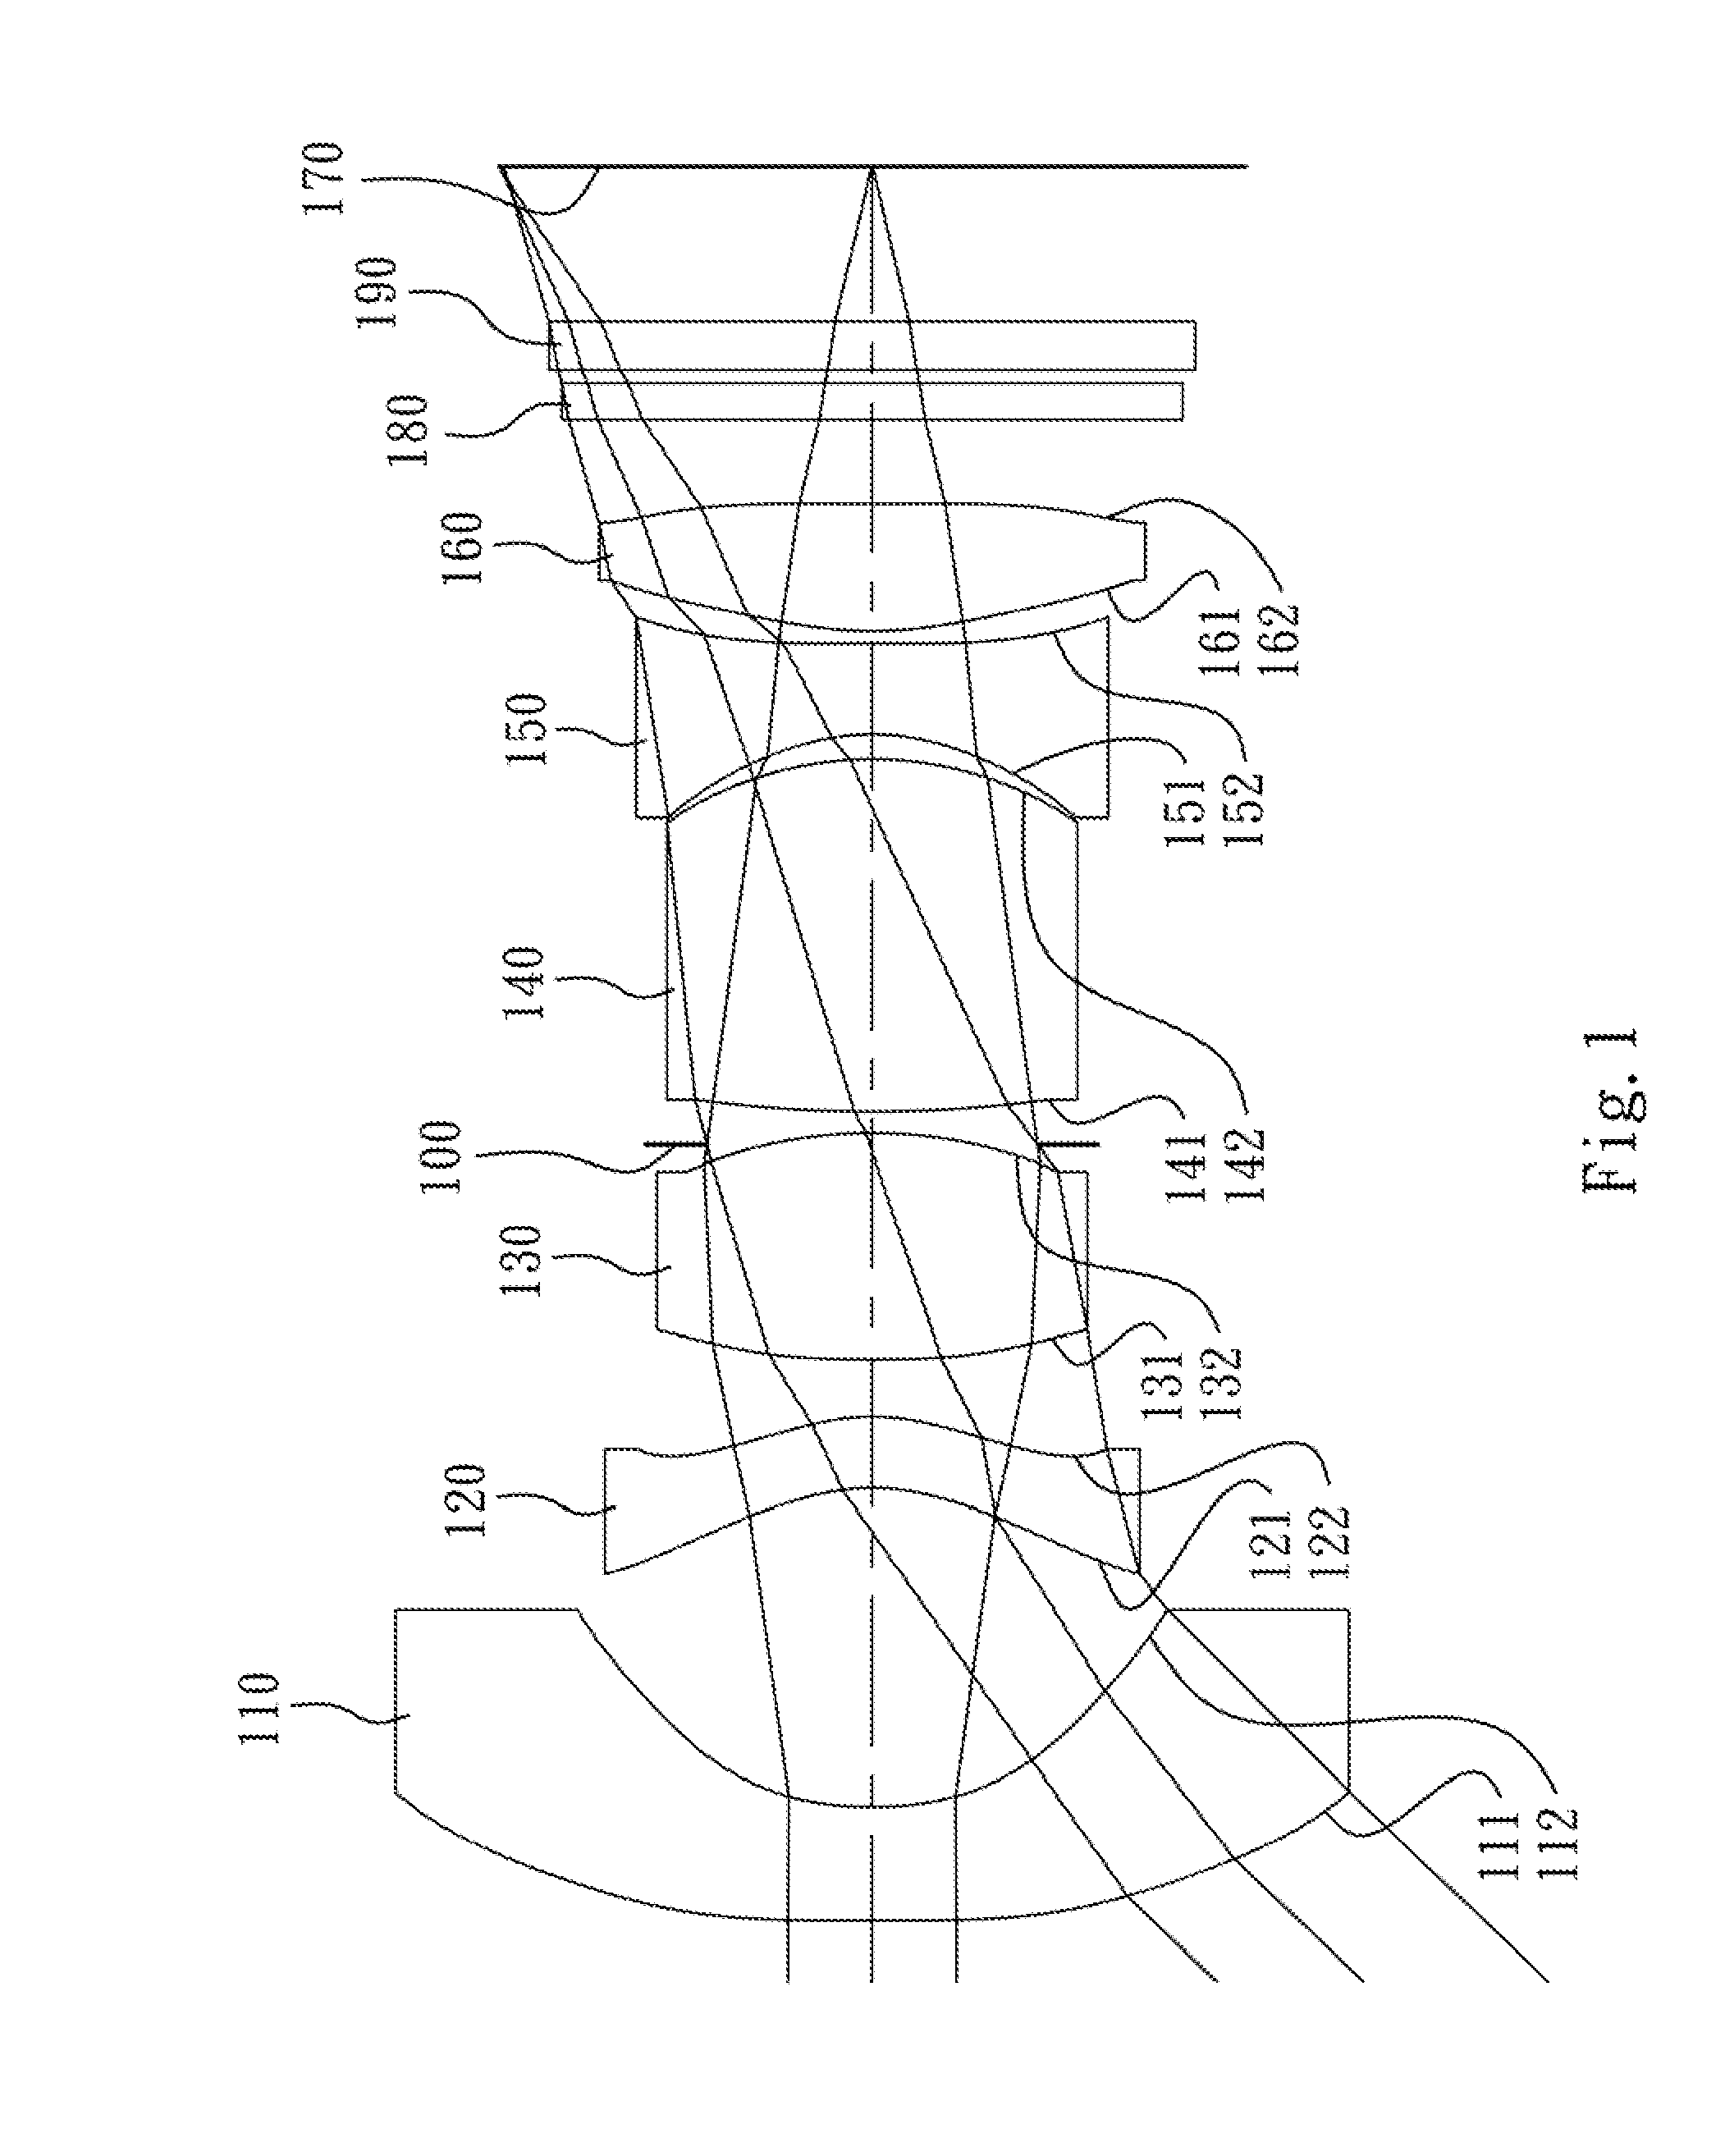 Wide-angle optical lens assembly